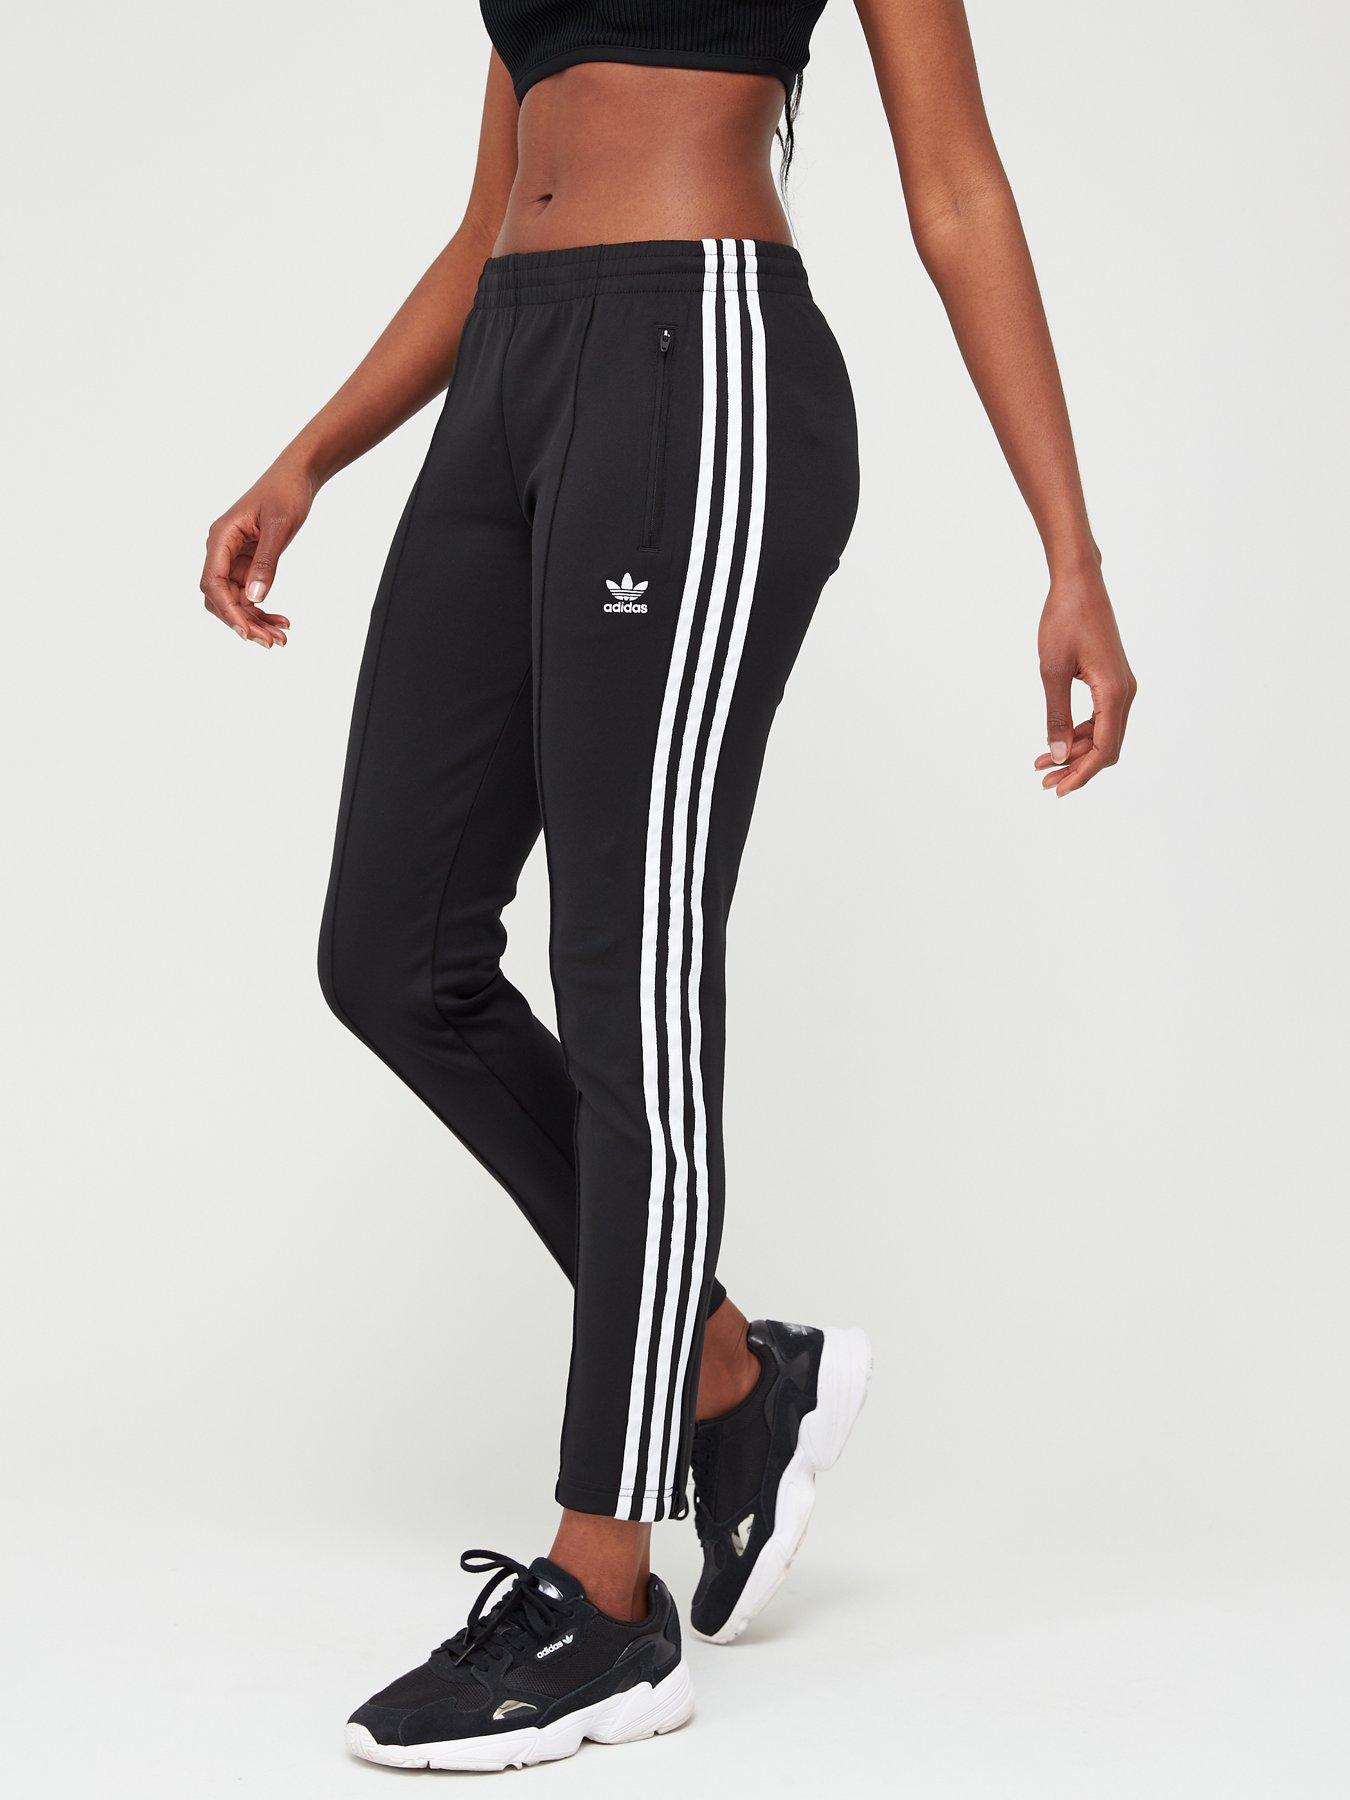 track bottoms womens